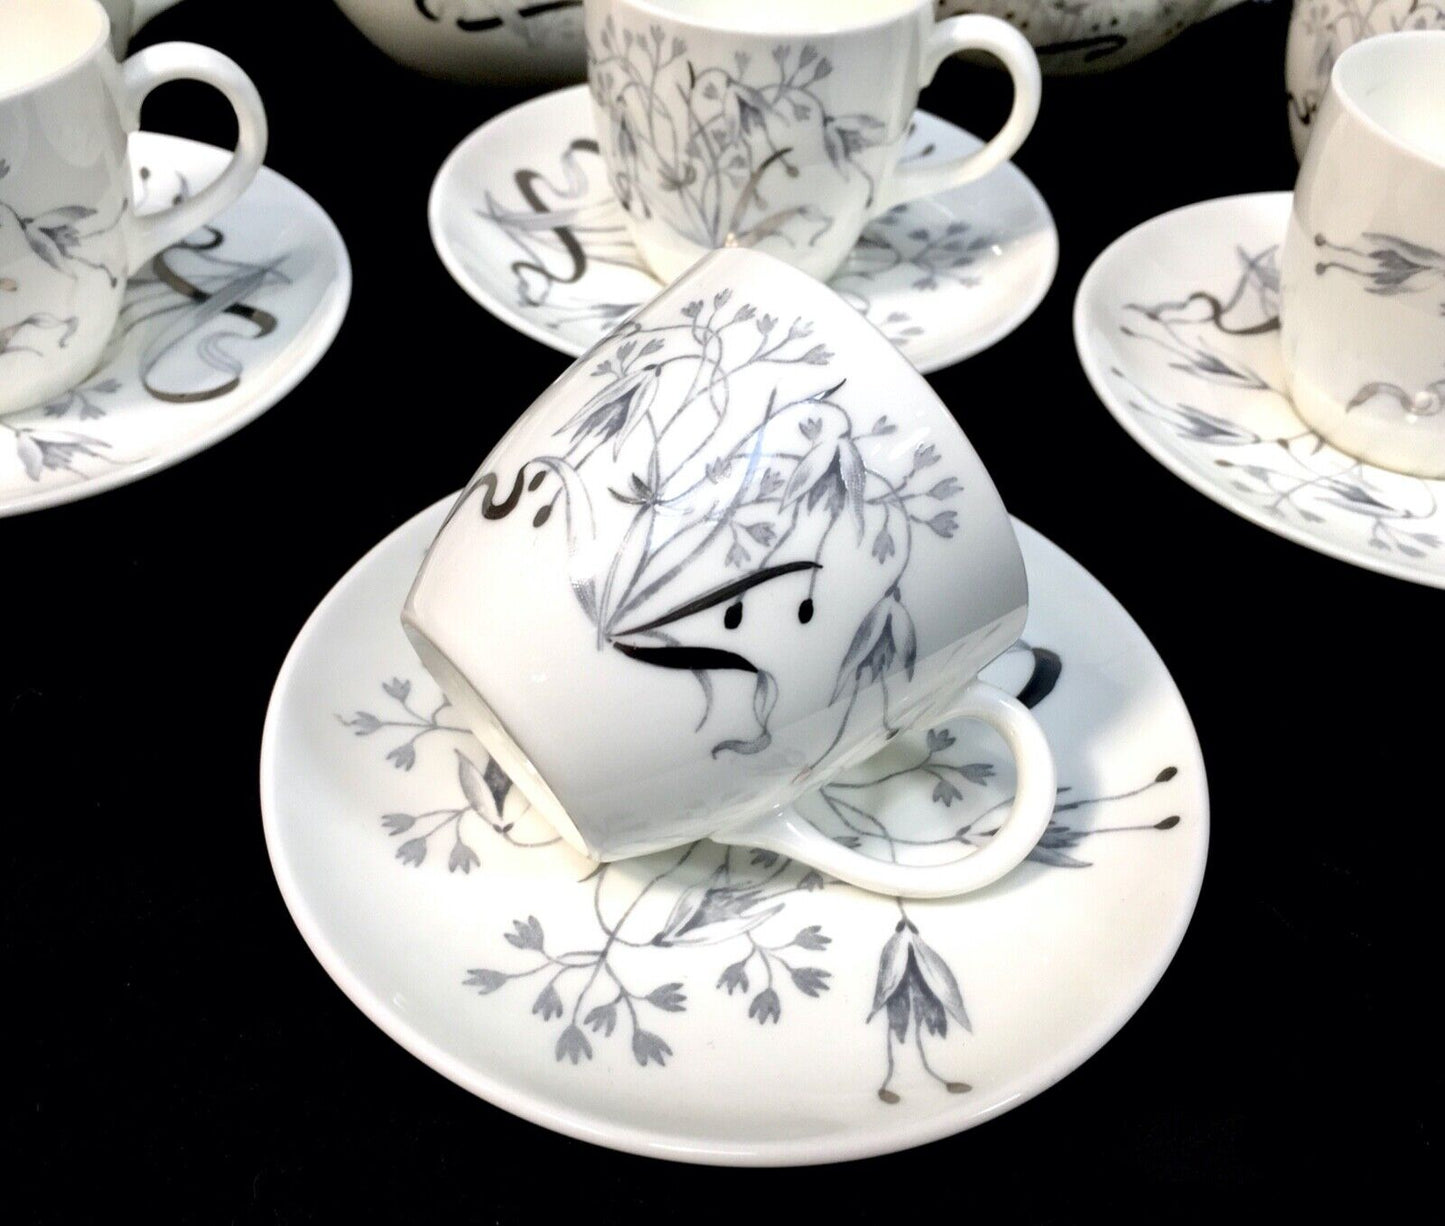 Antique Wedgwood Coffee Set - Wild Oats W4166 - For 6 People / Vintage China